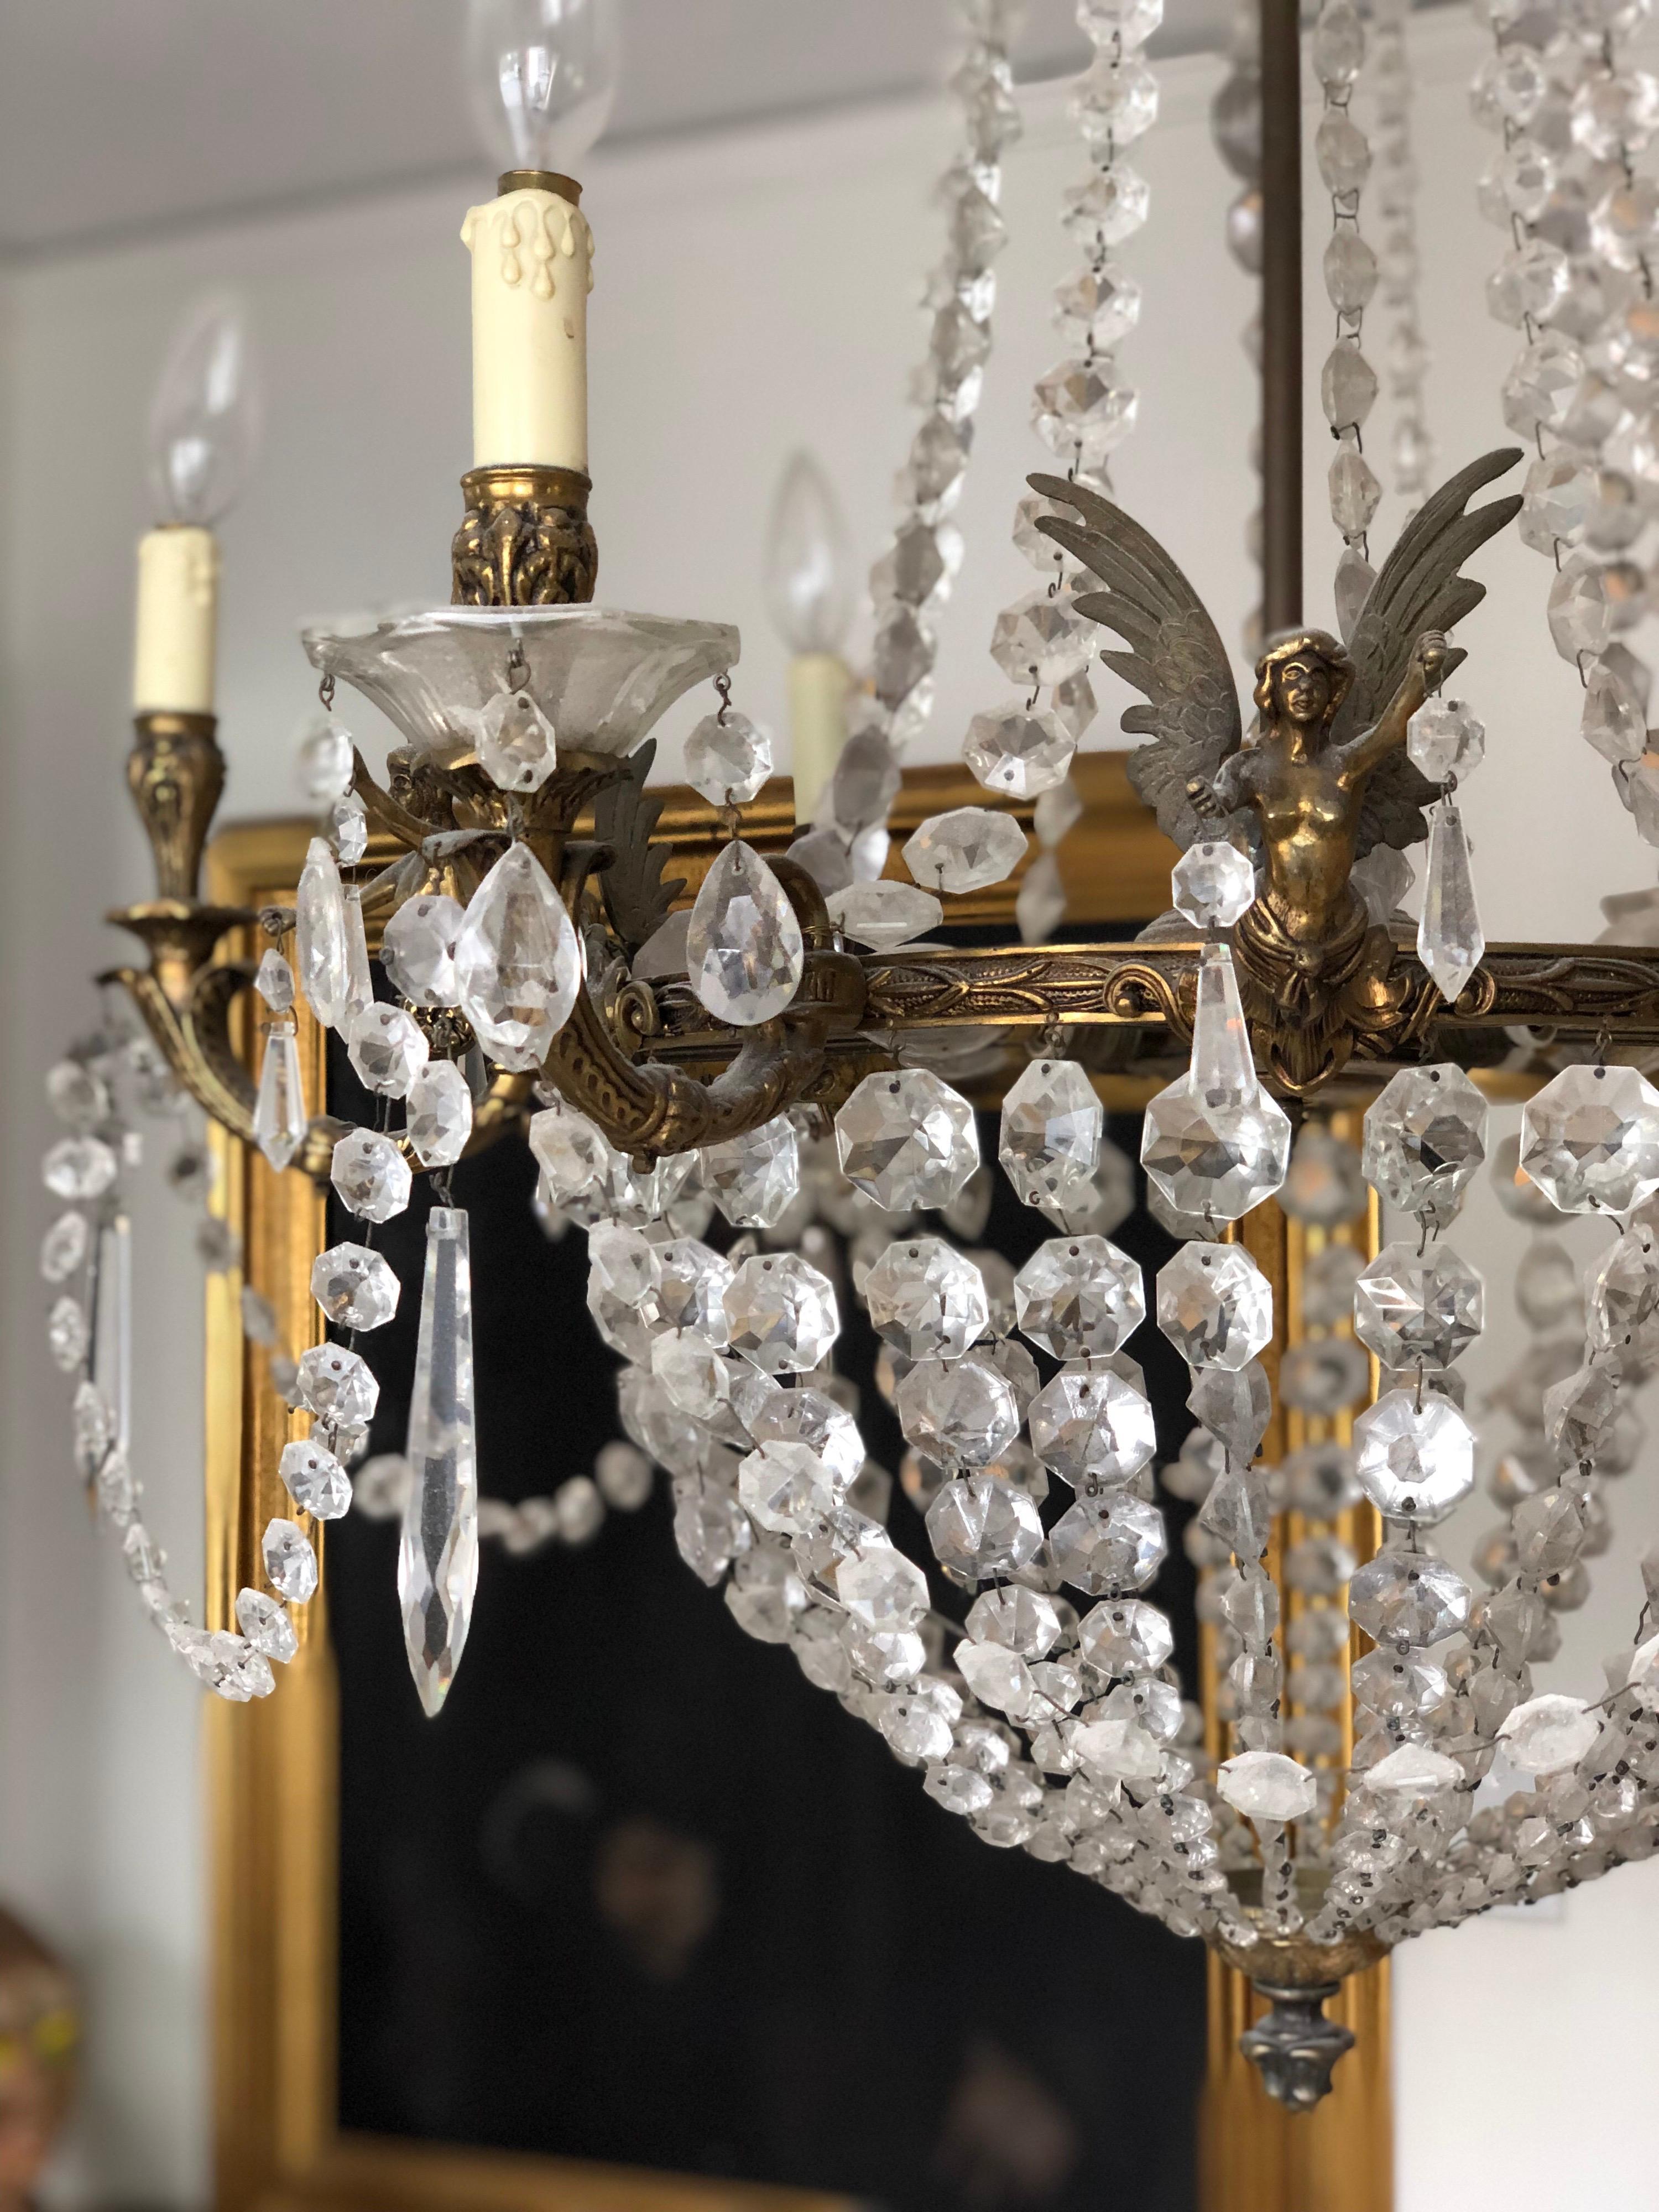 Antique French Empire style Sac a pearl/tear drop chandelier. Six exterior candelabra lights with 6 interior.
Features six angels/cherubs holding crystals. 

Approx 40 inch drop...currently 43 as it's currently hanging.